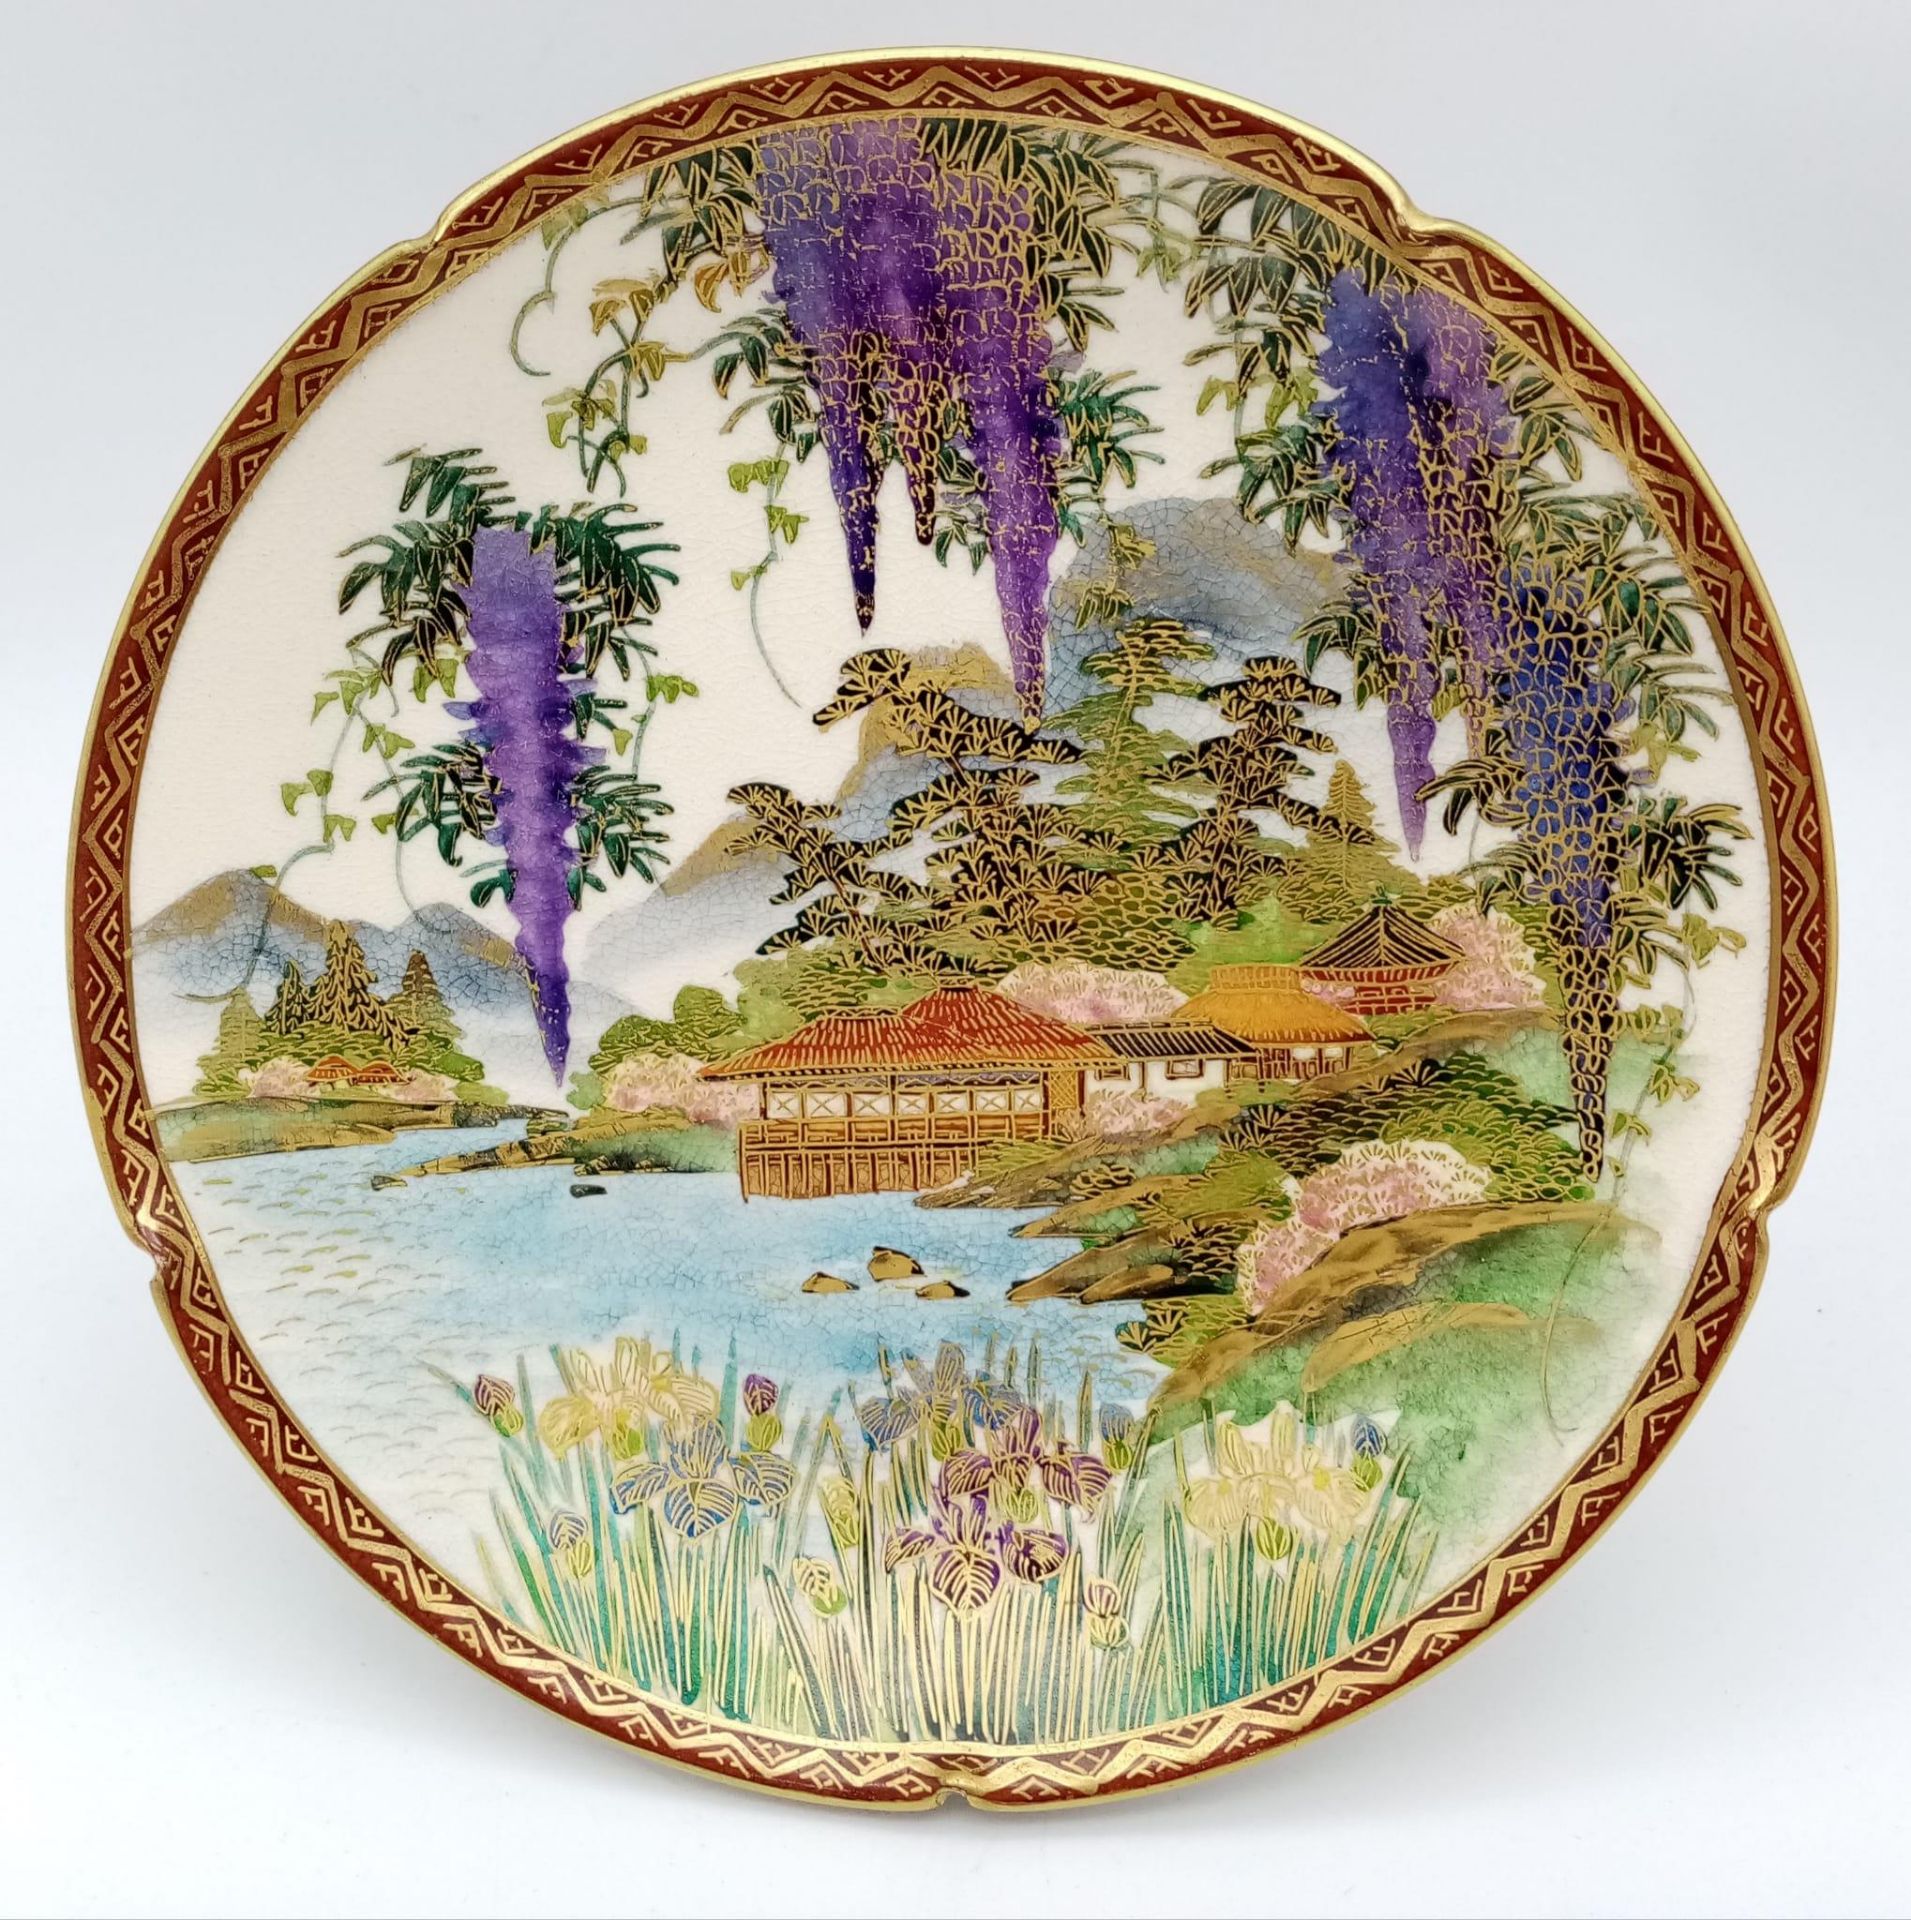 A Very Fine Antique (C1900) Japanese Meiji Satsuma Plate. Scalloped edges with a superb painted